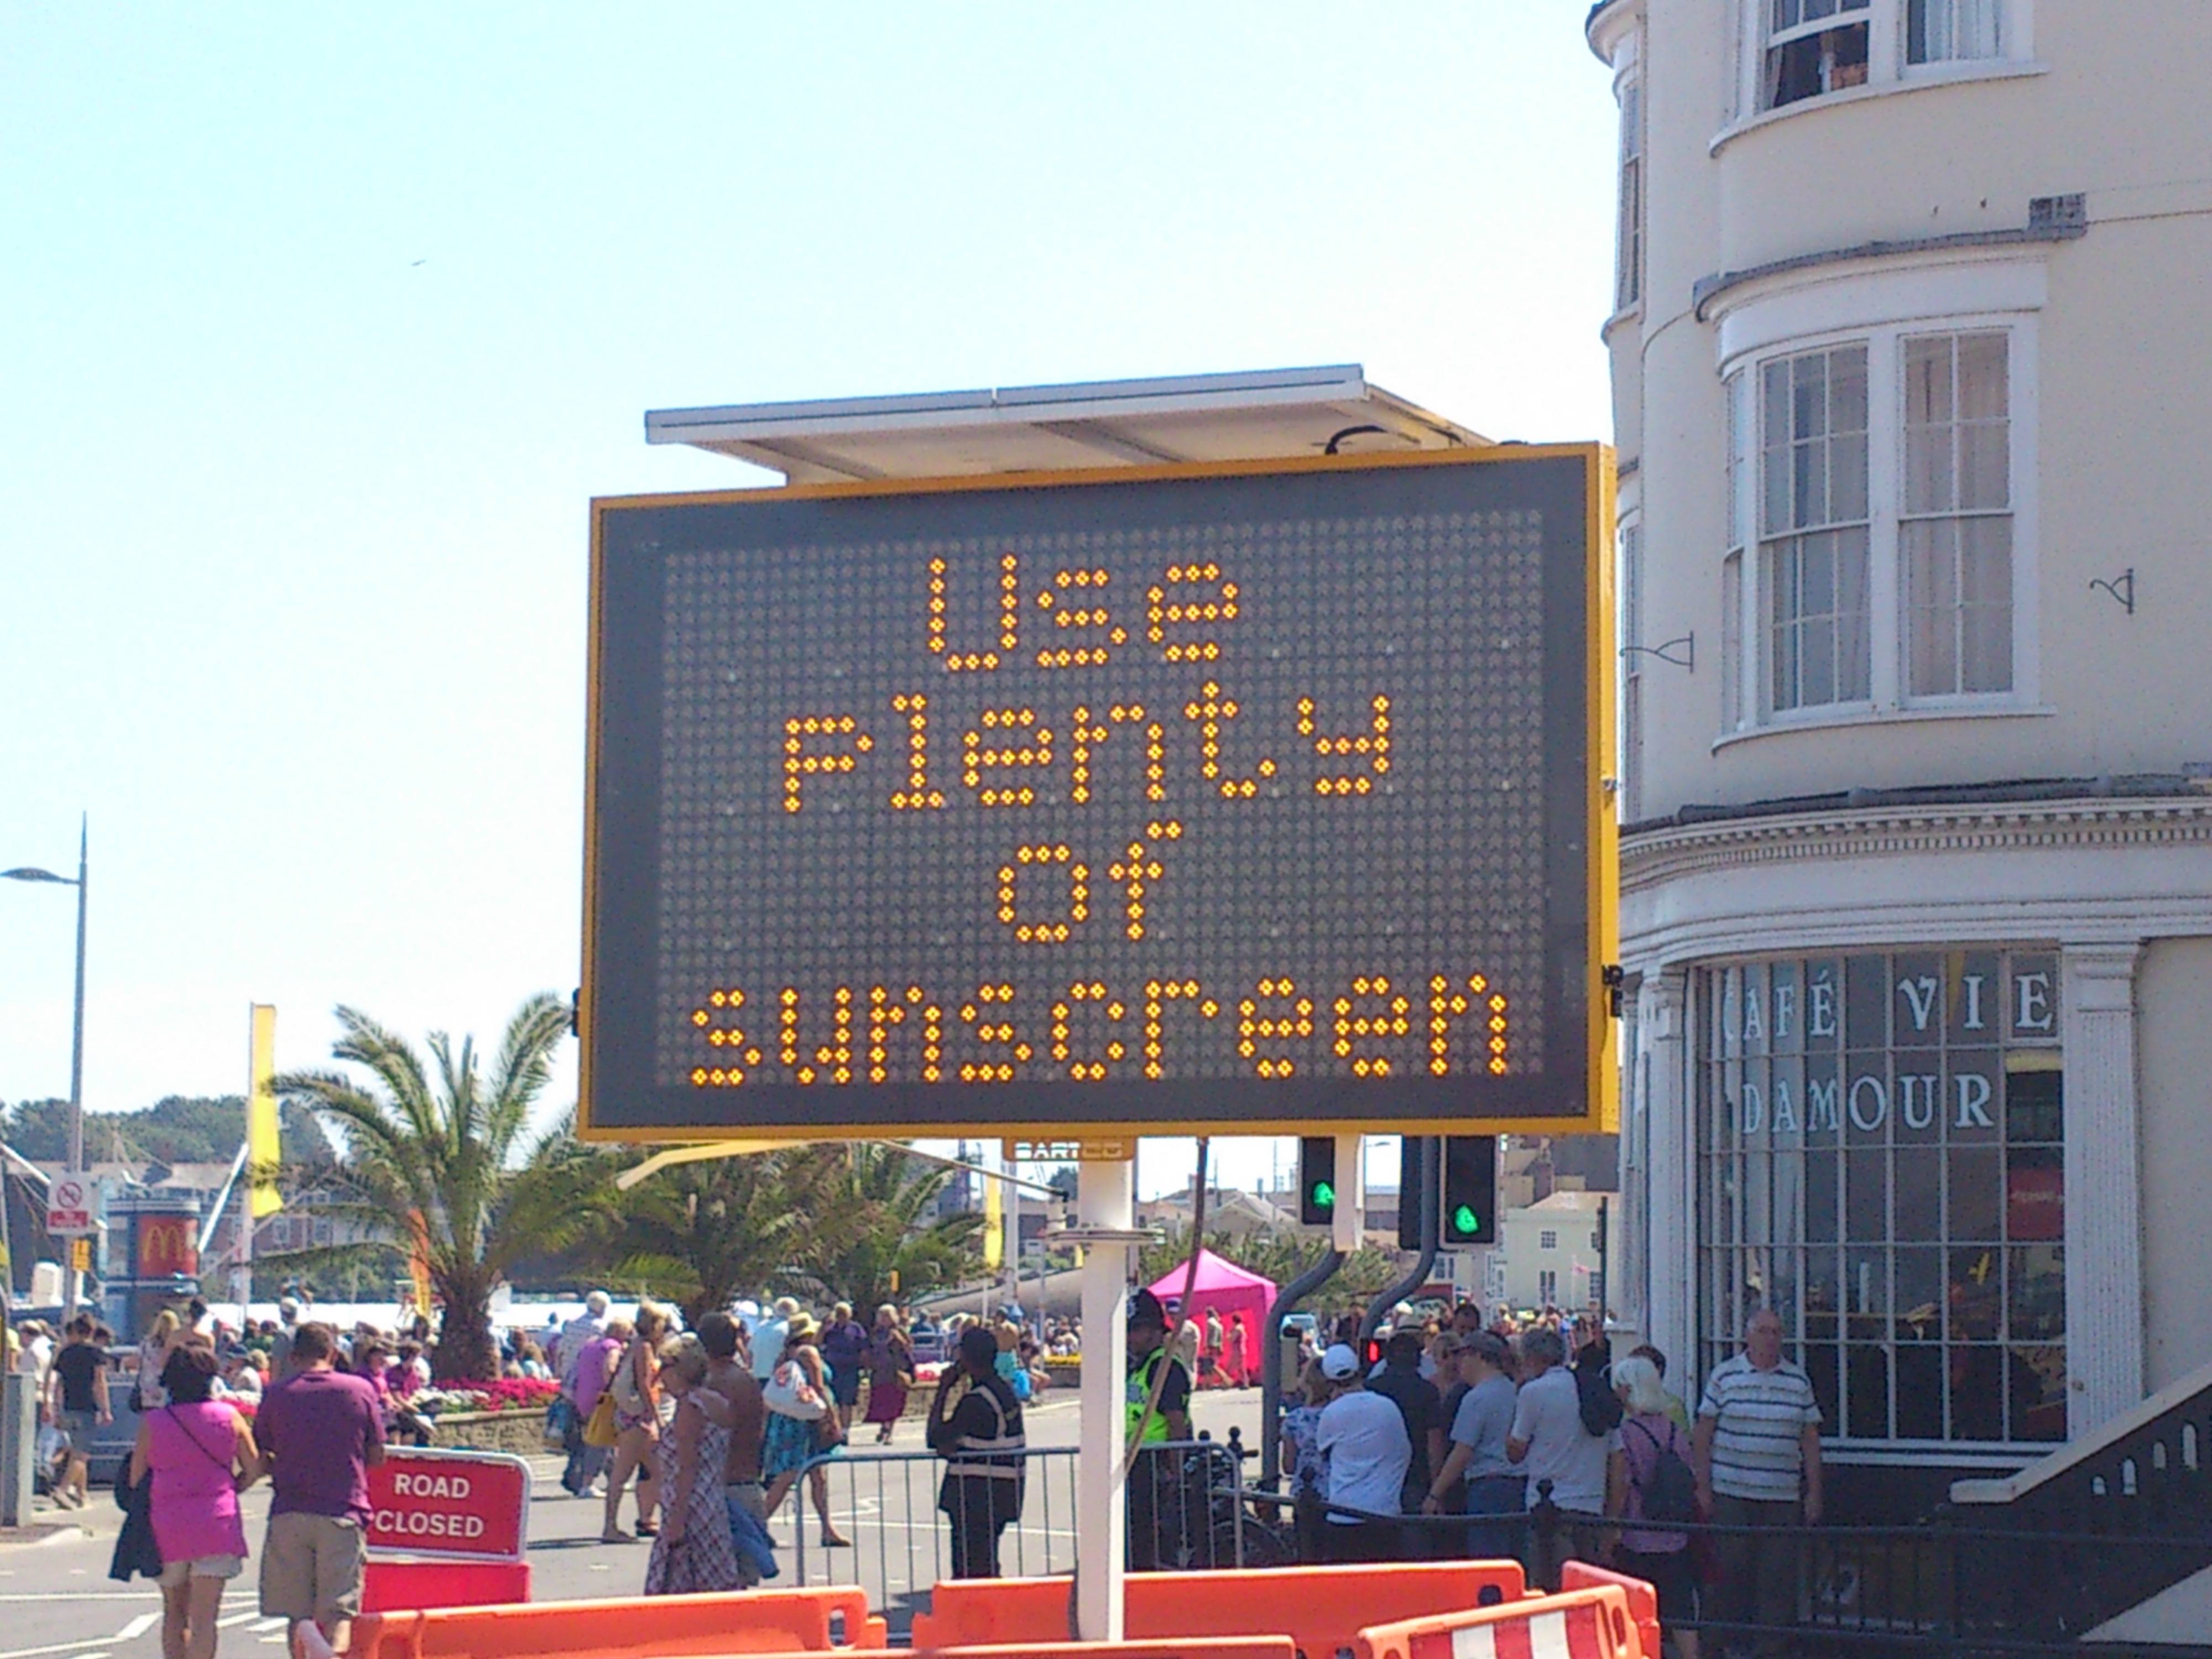 Physical Sunscreens vs. Chemical Sunscreens – The Argument